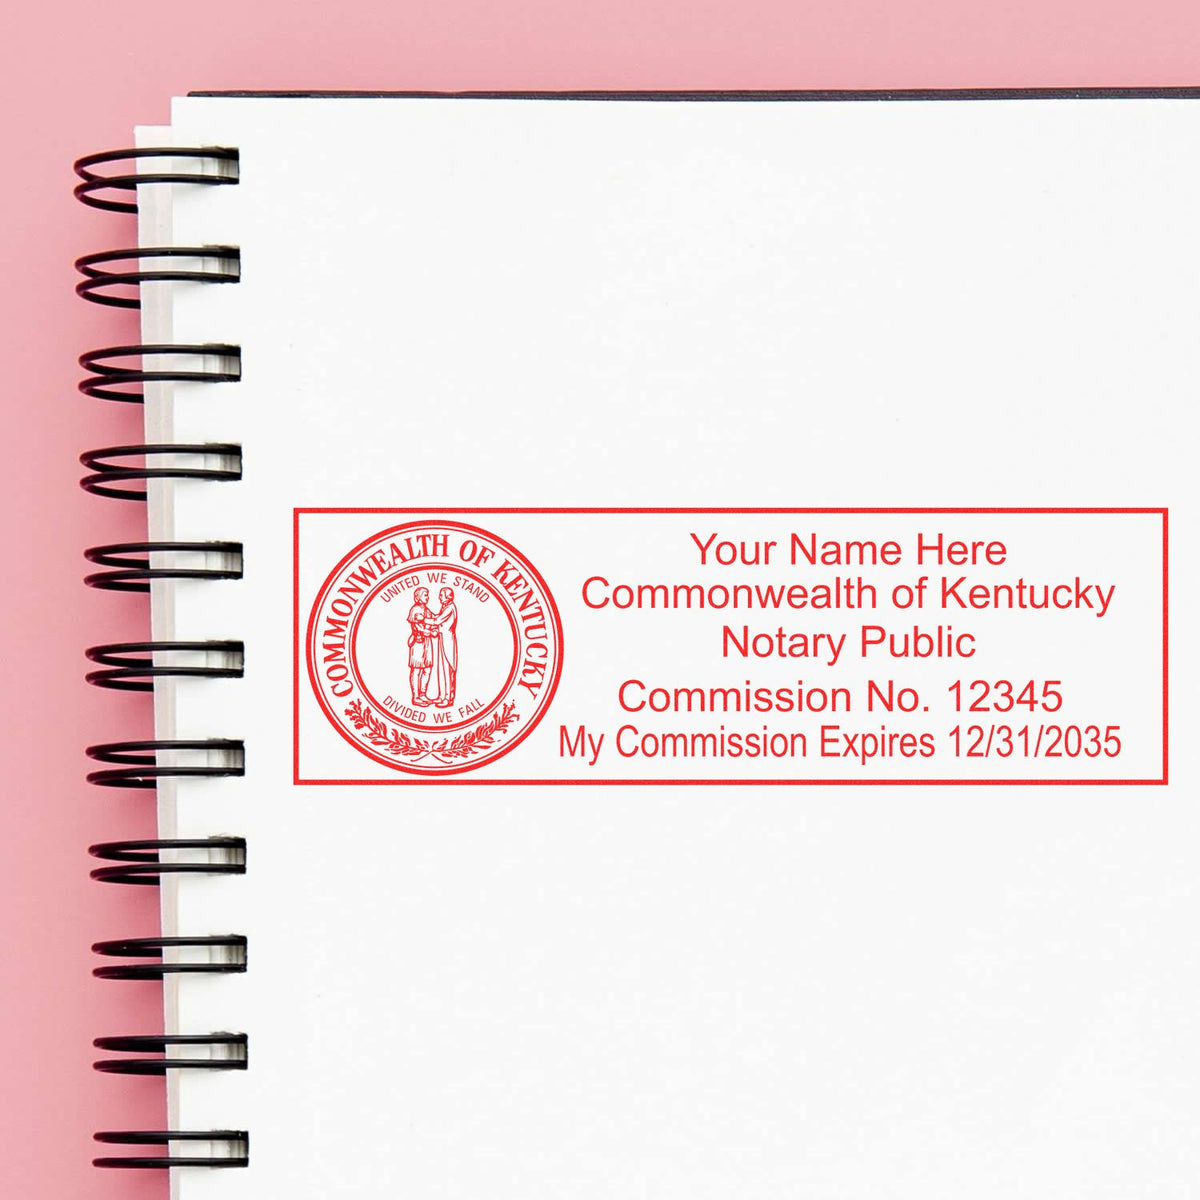 The Heavy-Duty Kentucky Rectangular Notary Stamp stamp impression comes to life with a crisp, detailed photo on paper - showcasing true professional quality.